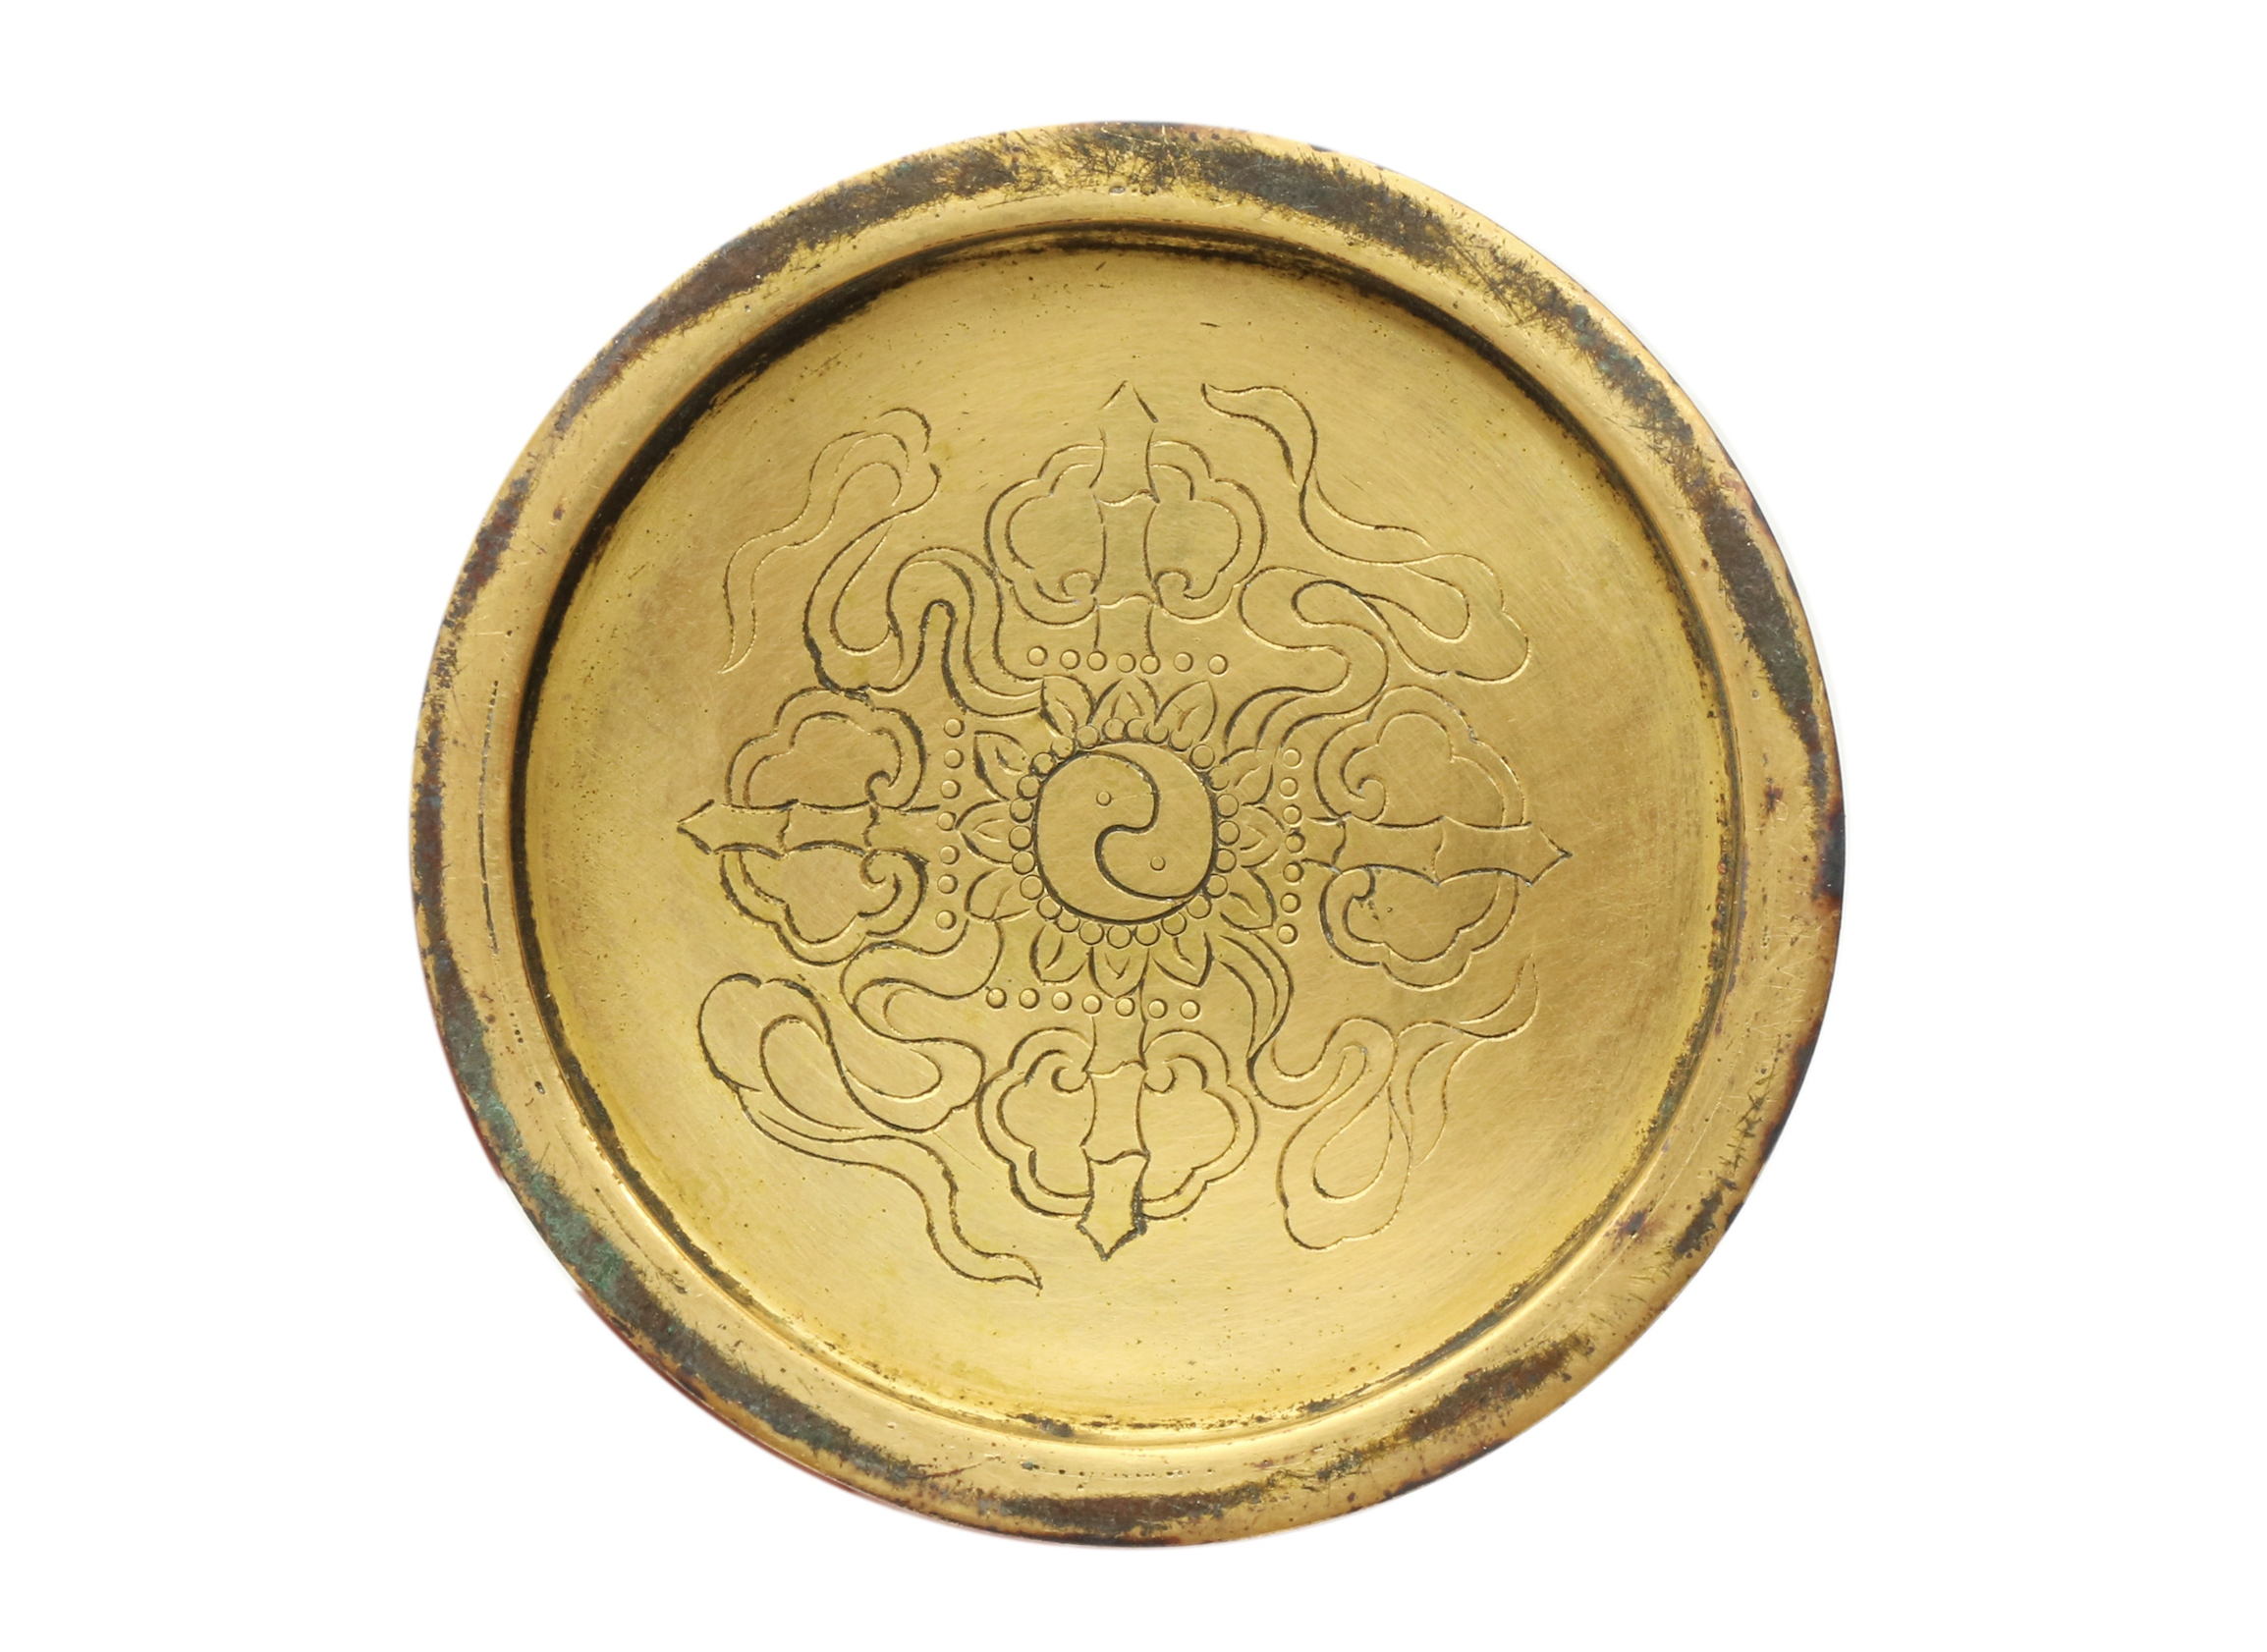 The gilt underside of the Ming dynasty cloisonne vessel is incised with the protective visvavajra motif. Image courtesy of Chiswick Auctions